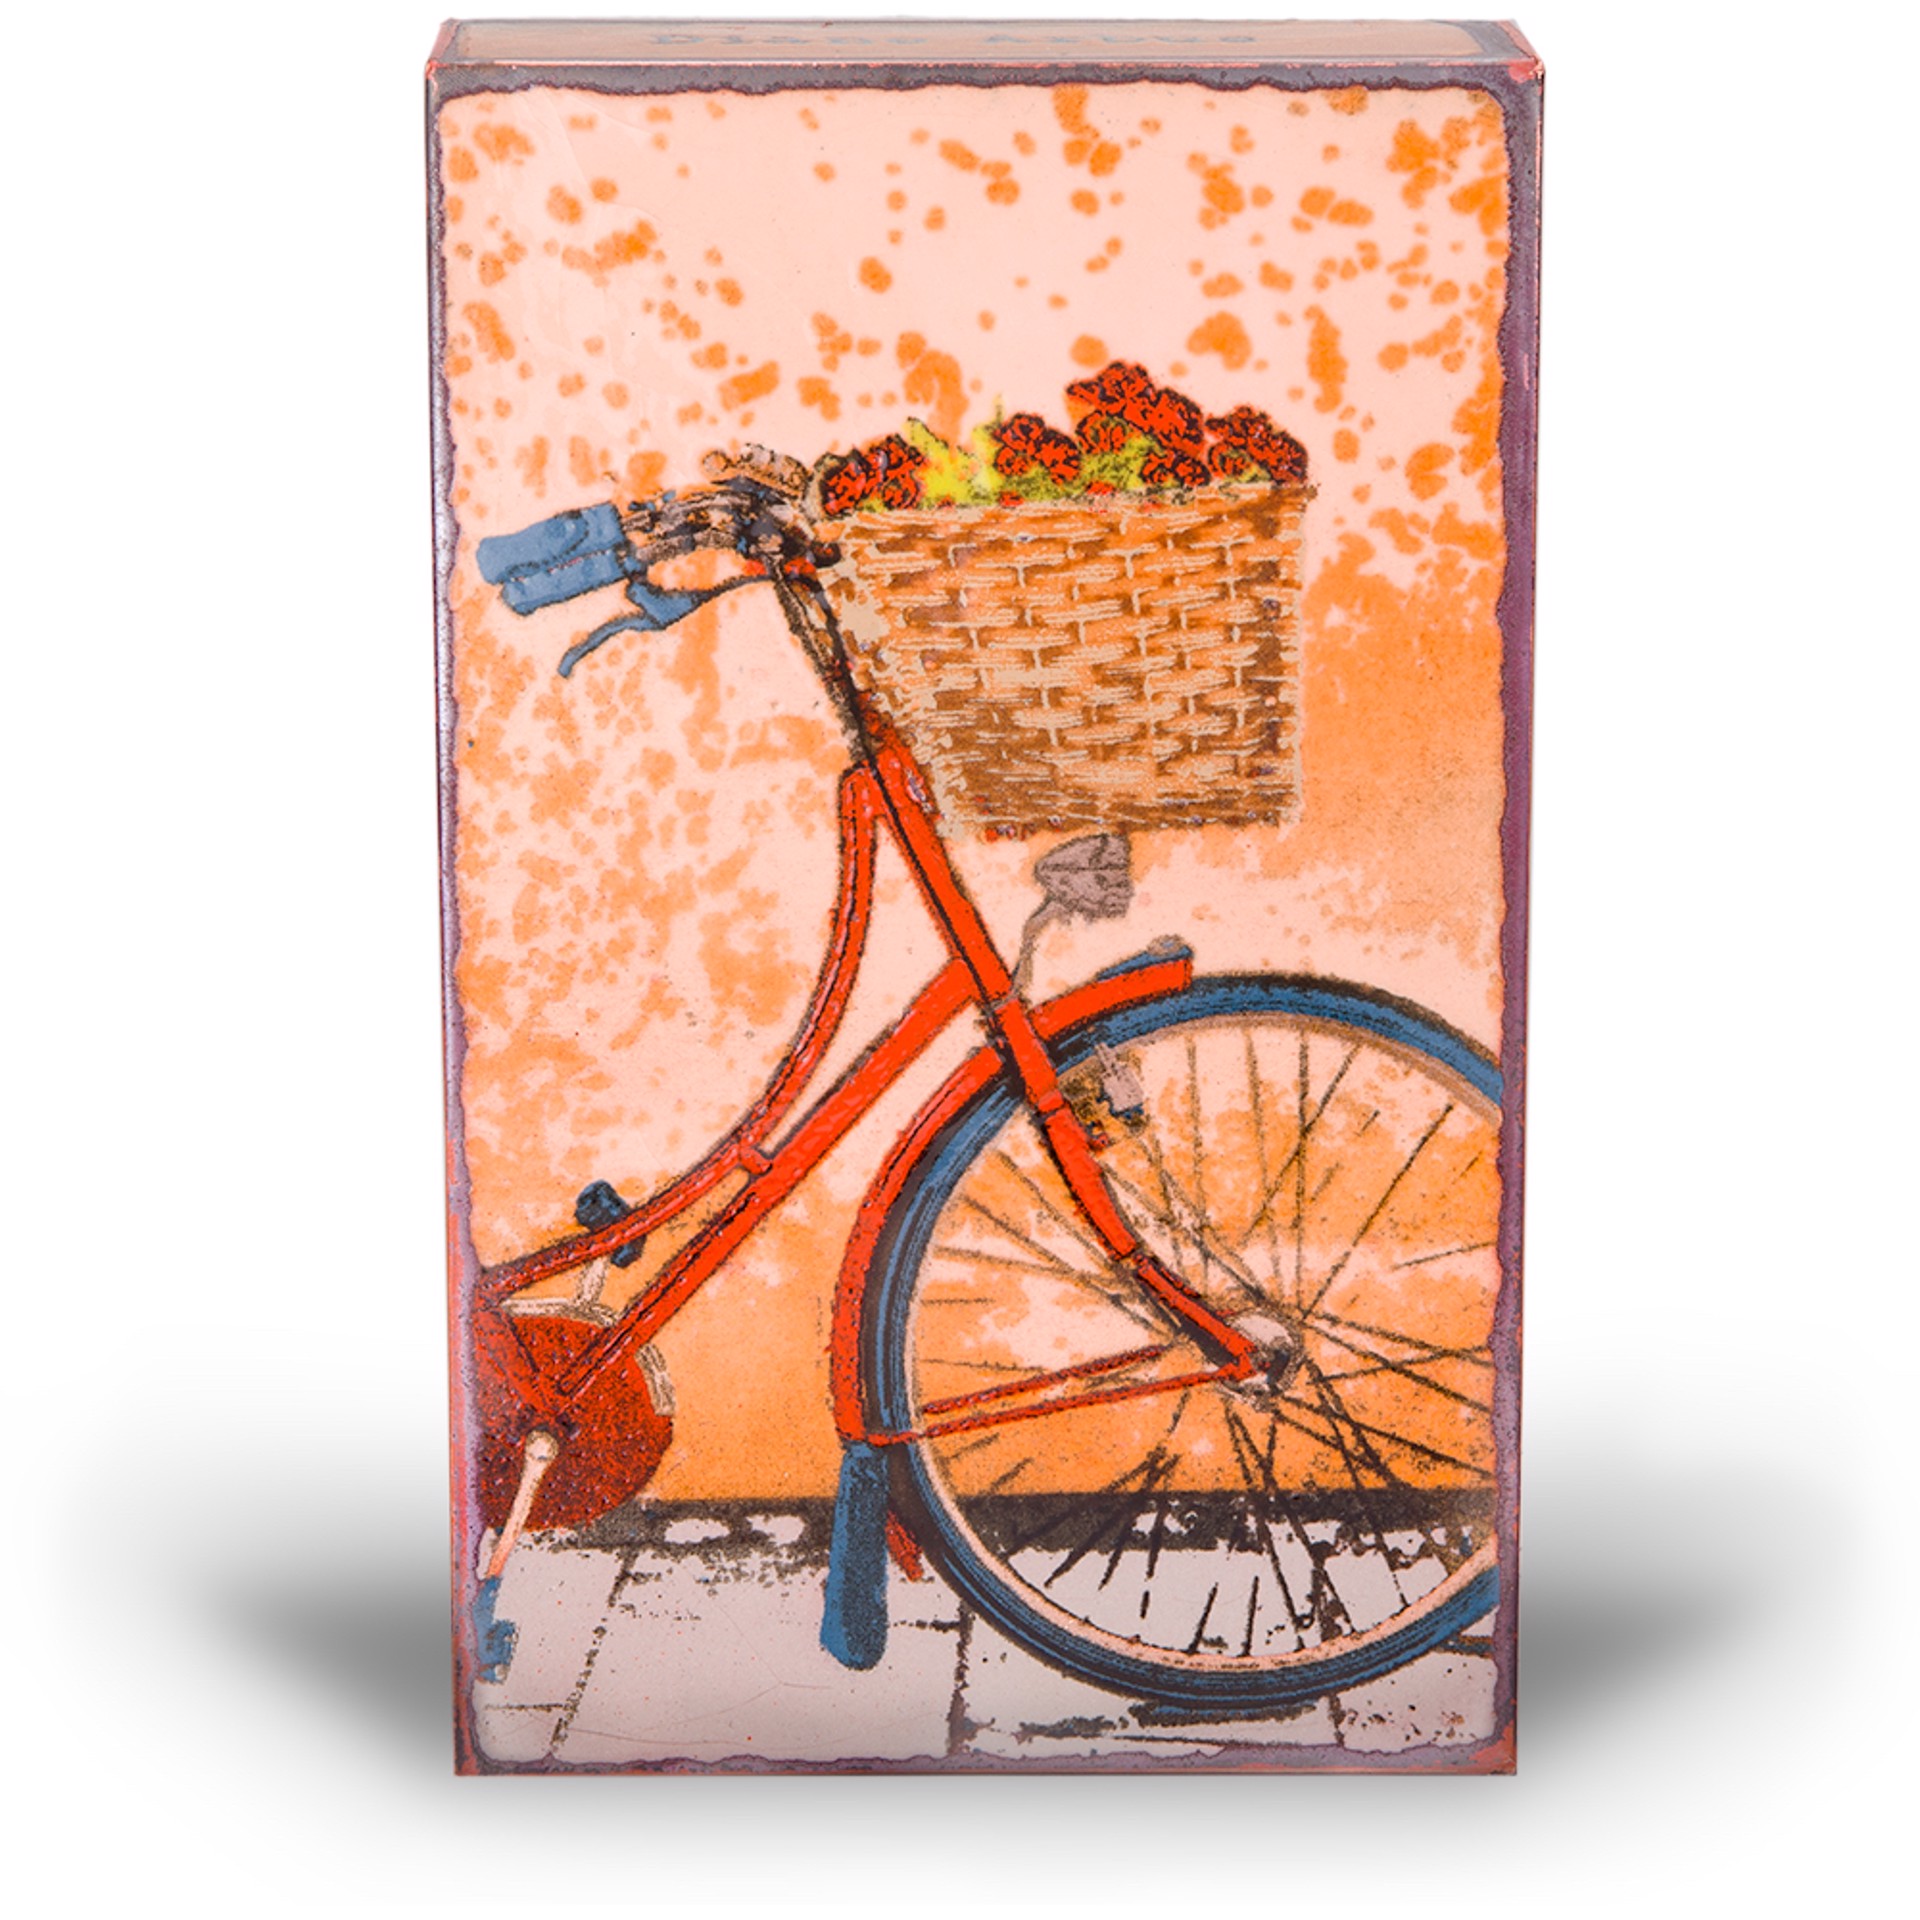 A Houston Llew Glass Fired To Copper Spiritile #229 Featuring A Bicycle and Basket And A Quote By Diane Arbus, Available At Gallery Wild